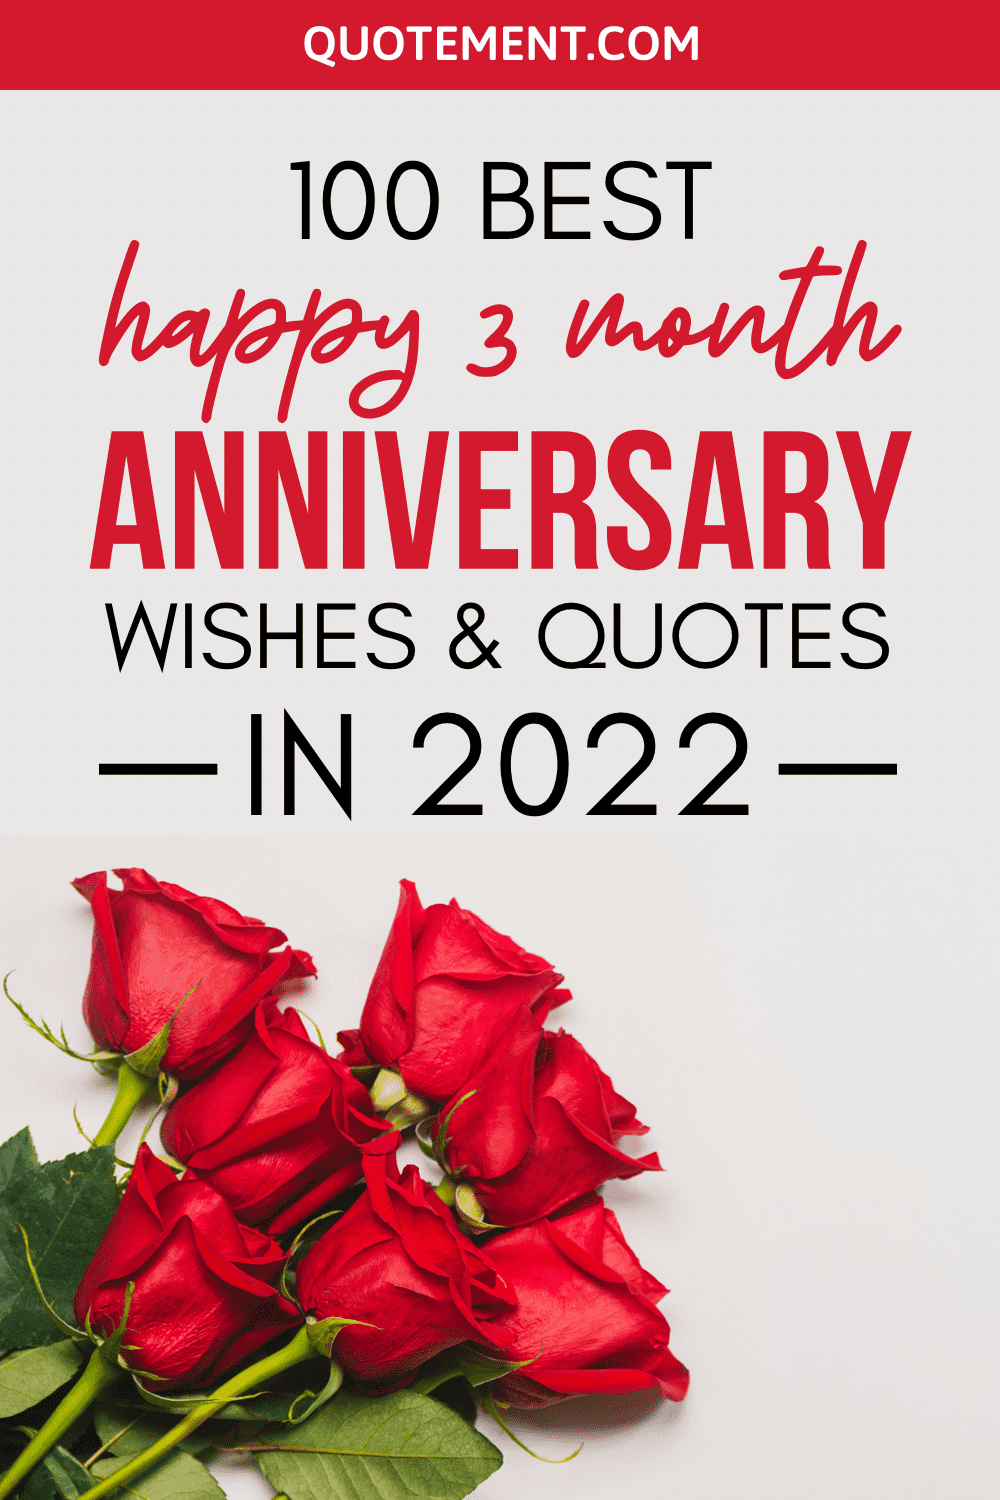 100 Best Happy 3 Month Anniversary Wishes & Quotes pinterest